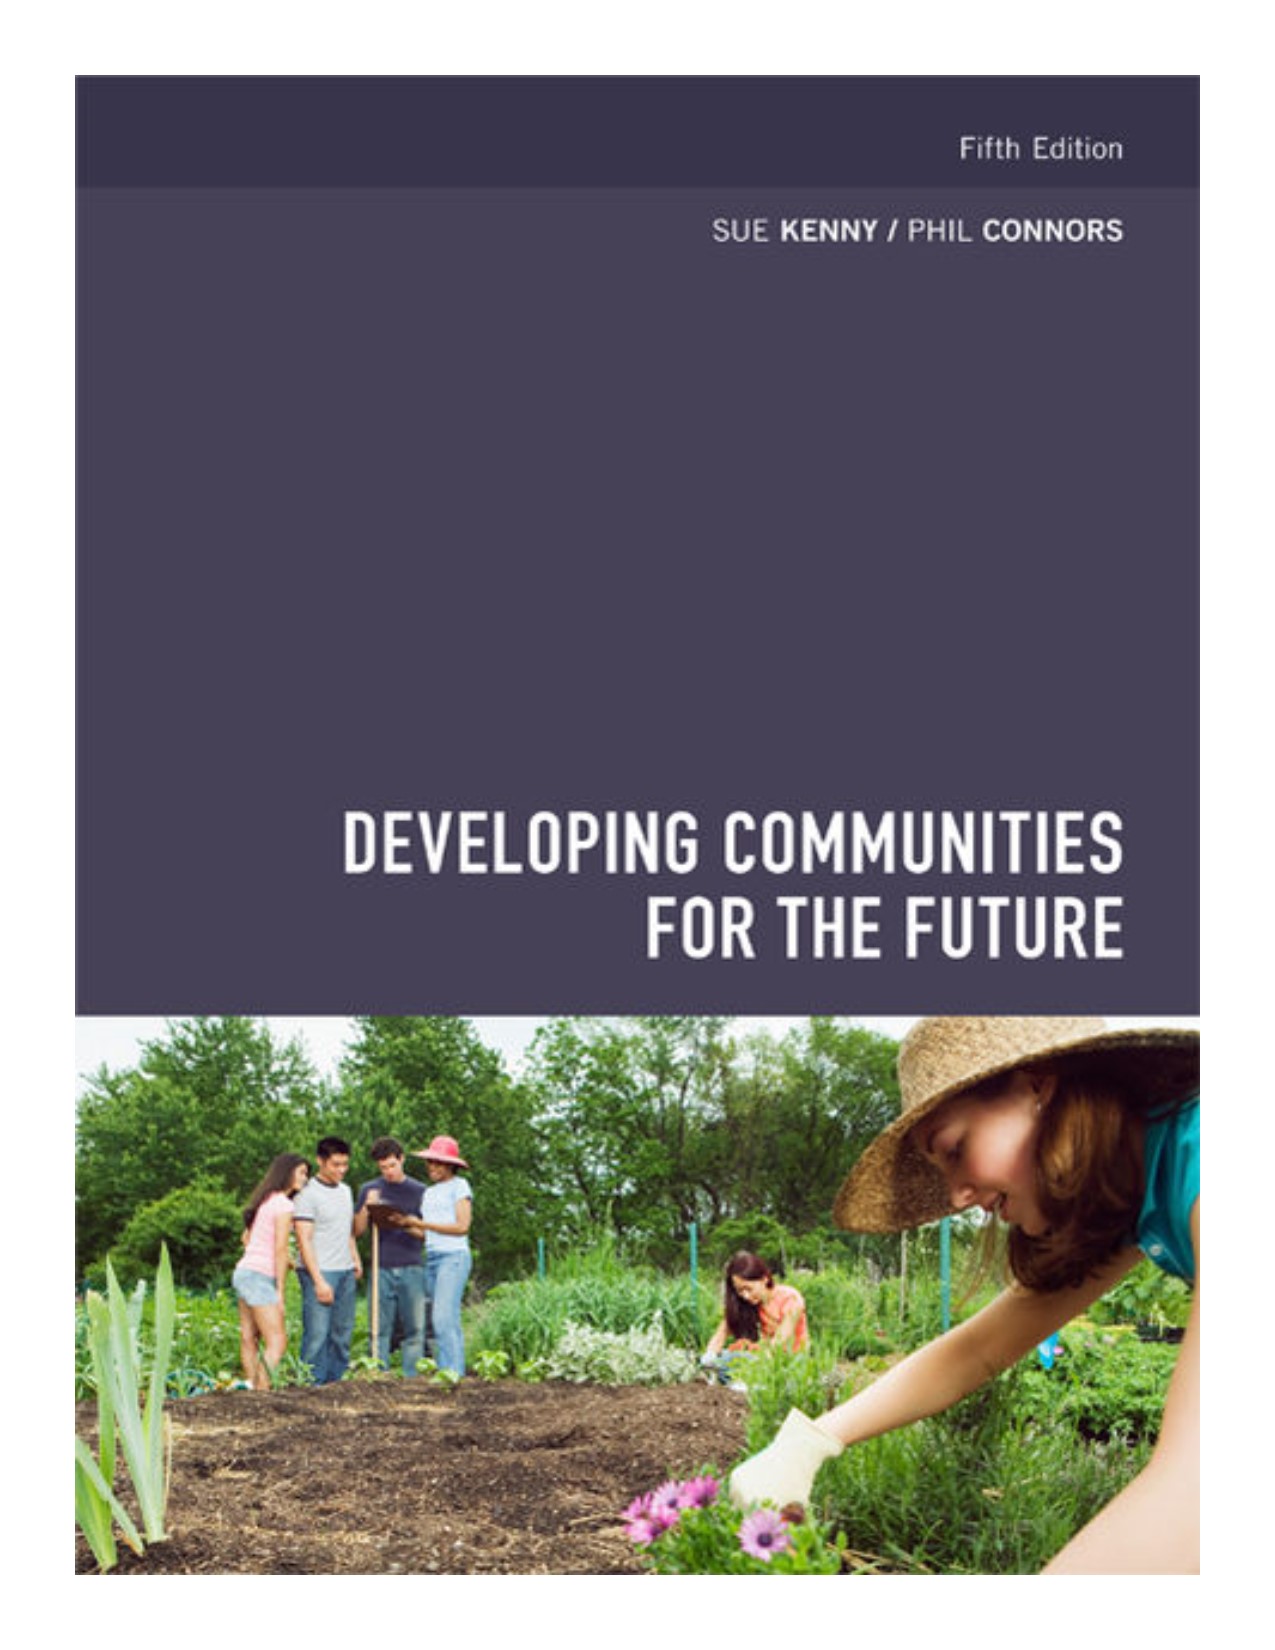 Developing communities for the future